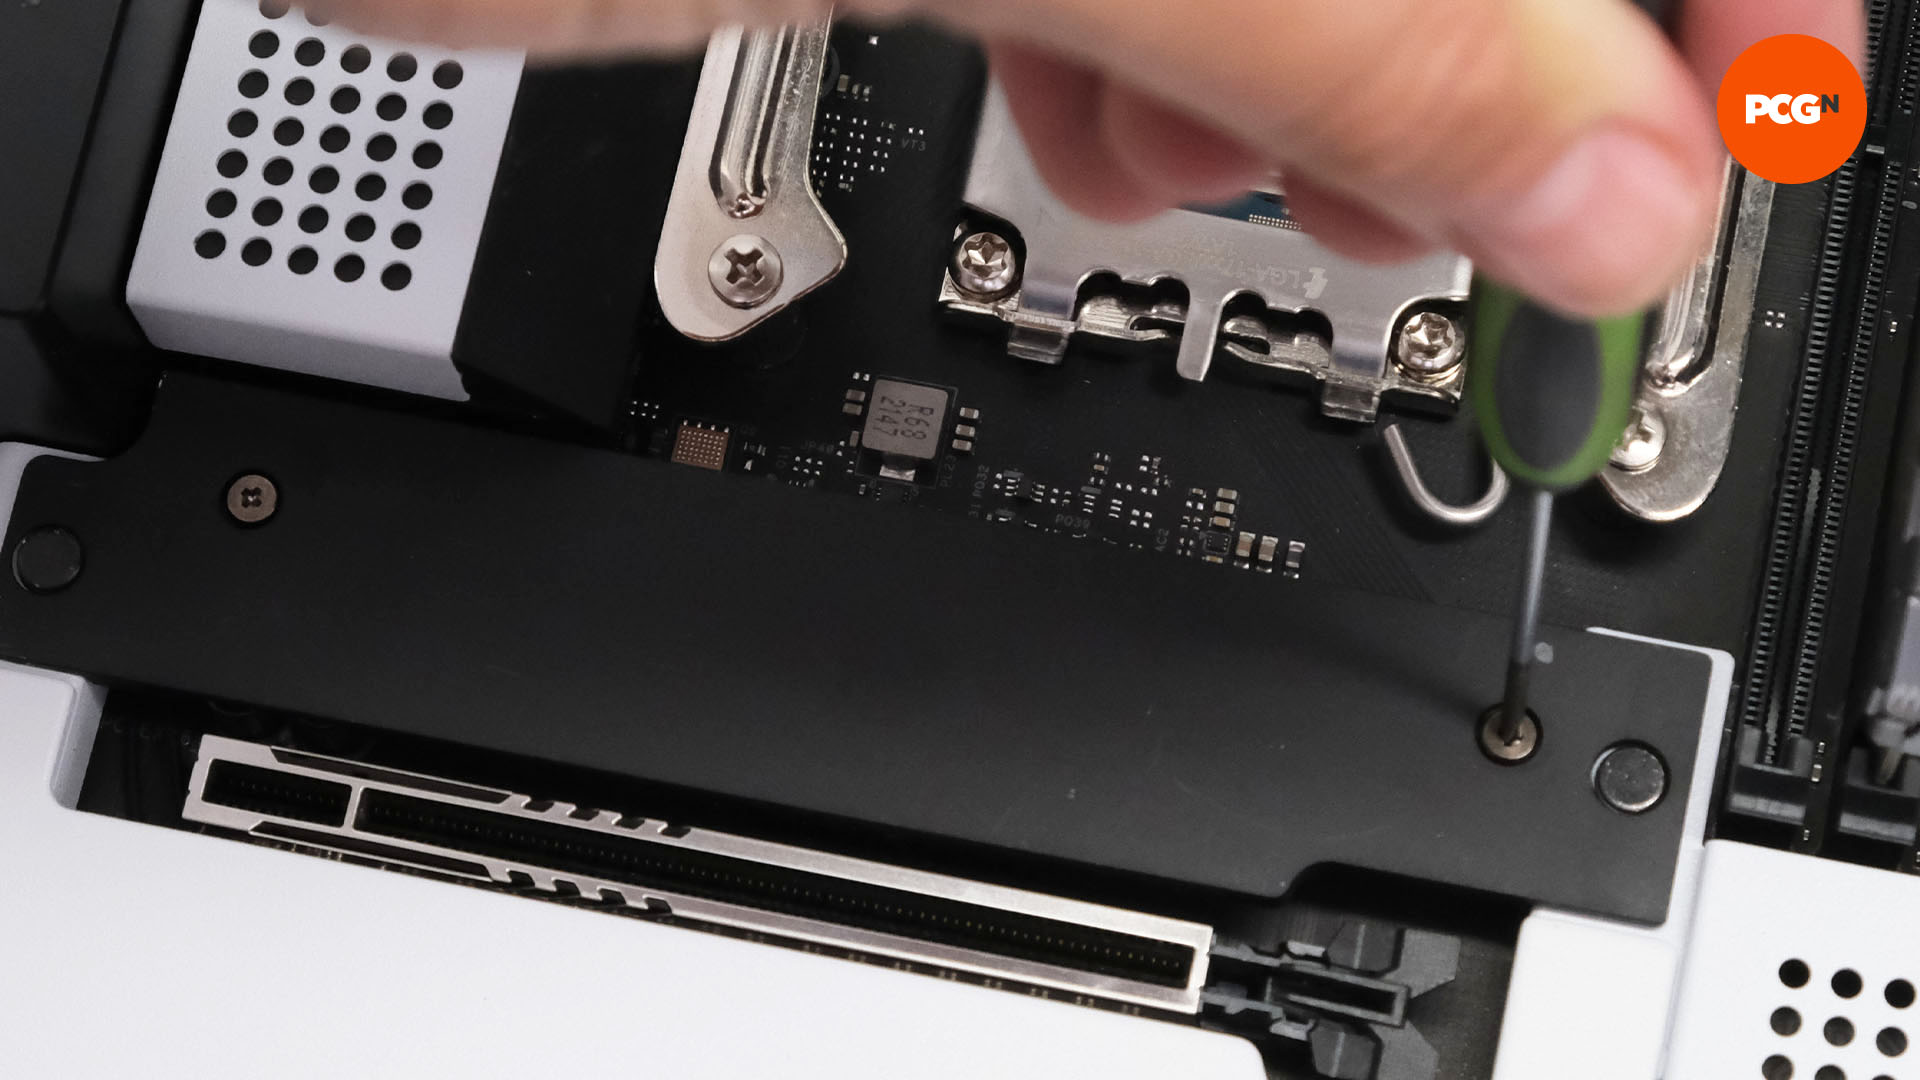 How to build a gaming PC: Secure M.2 SSD heatsink